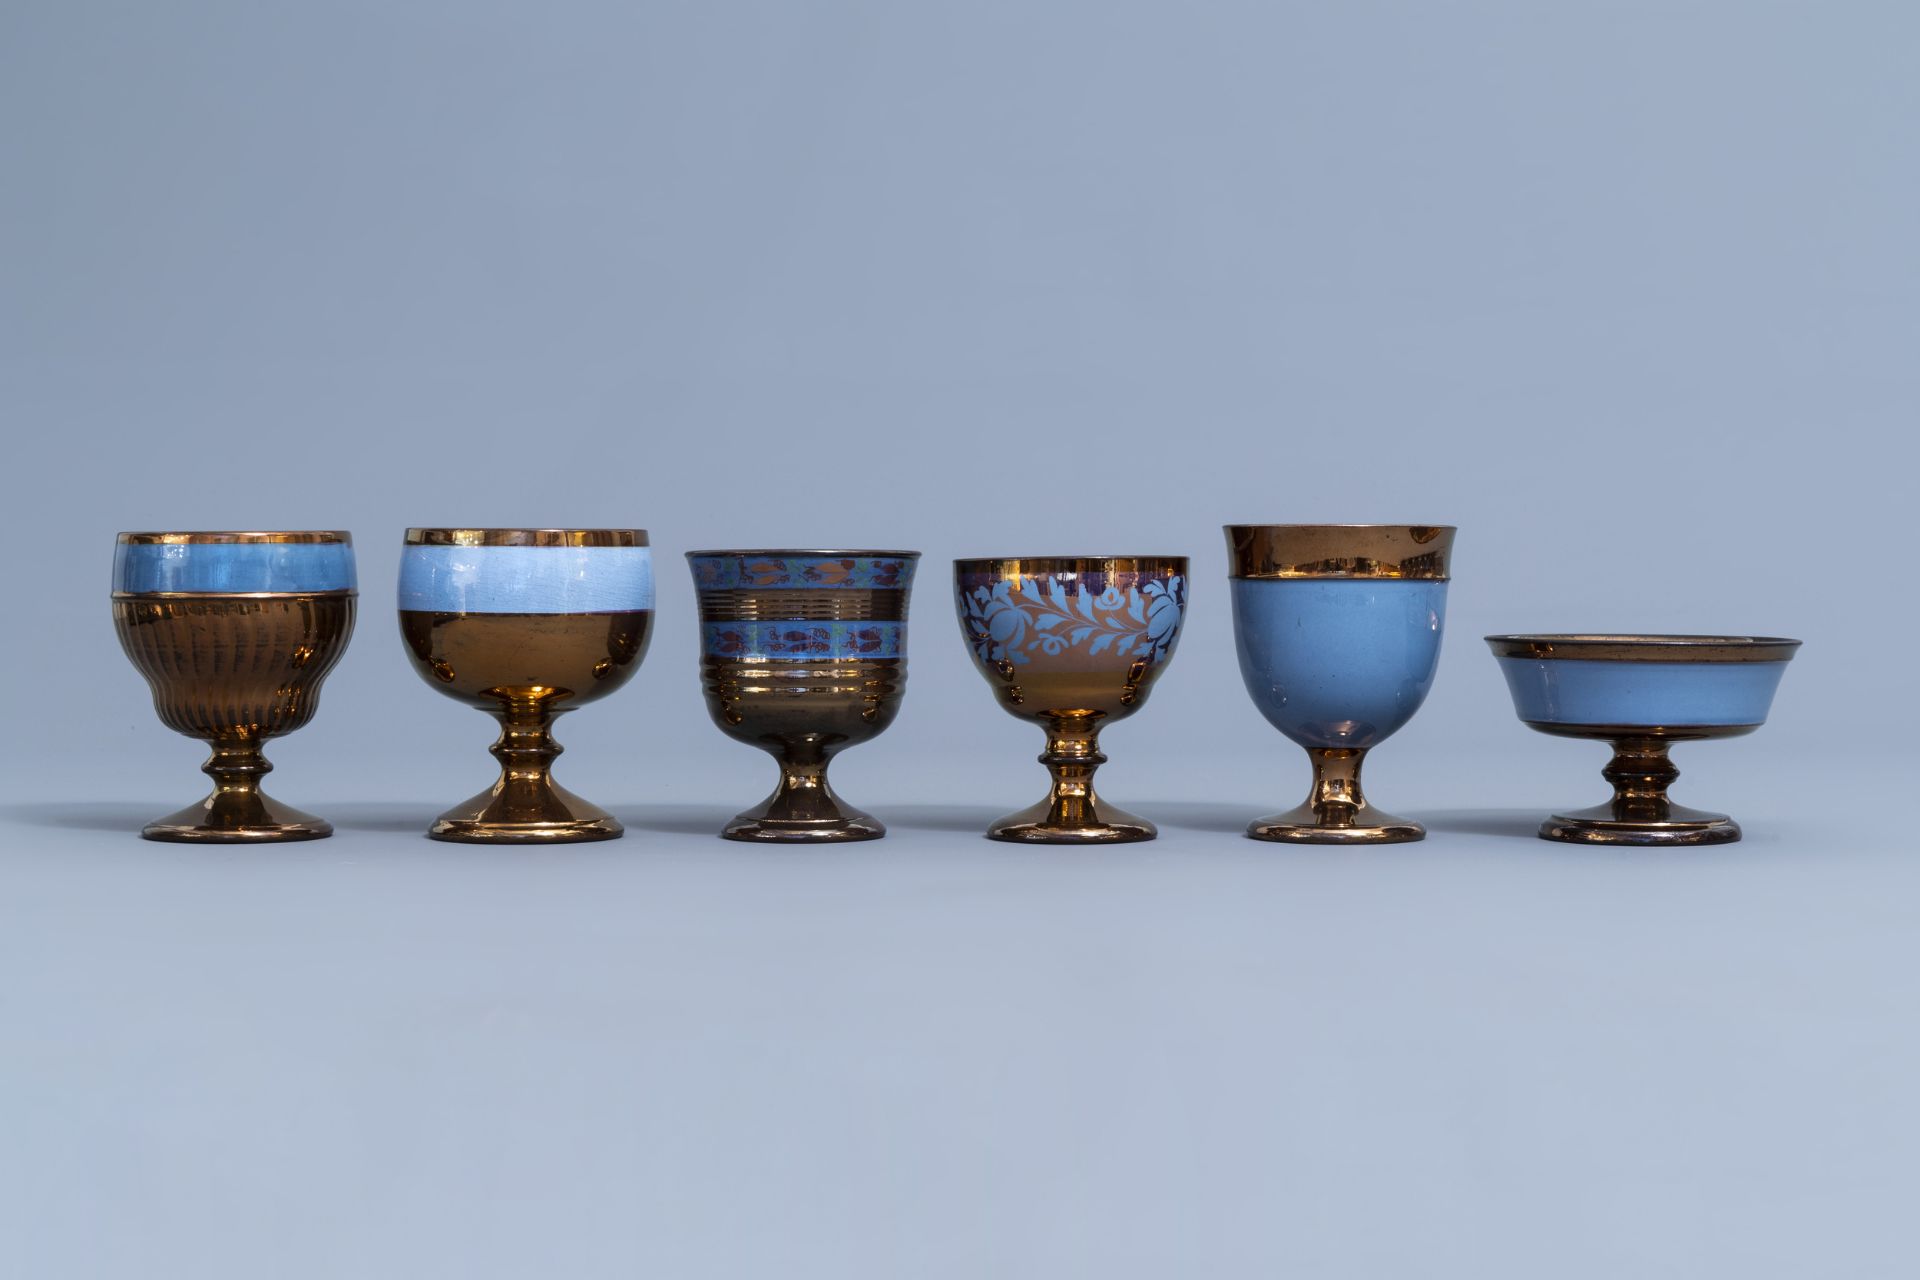 A varied collection of English lustreware items with blue design, 19th C. - Image 28 of 50